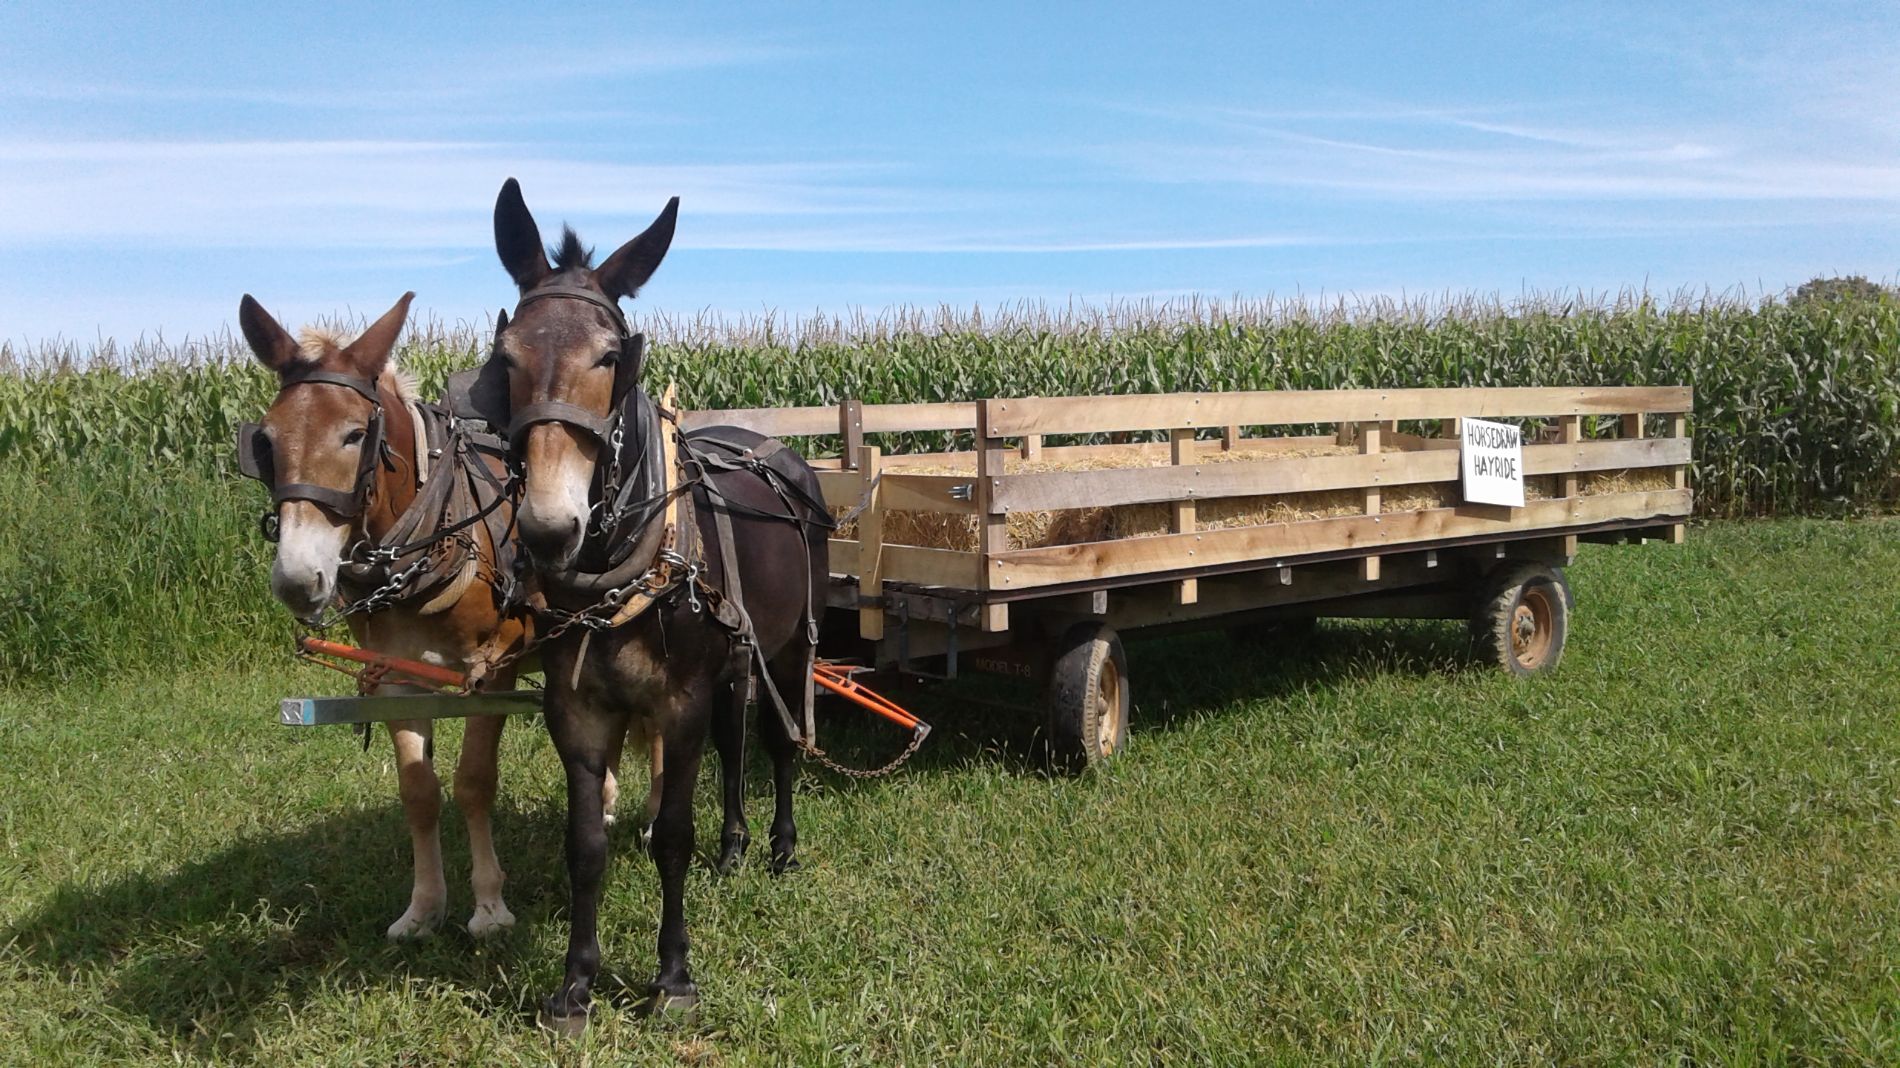 Two Donkeys Pulling A Wagon During A Farm Tour At Old Windmill Farm.